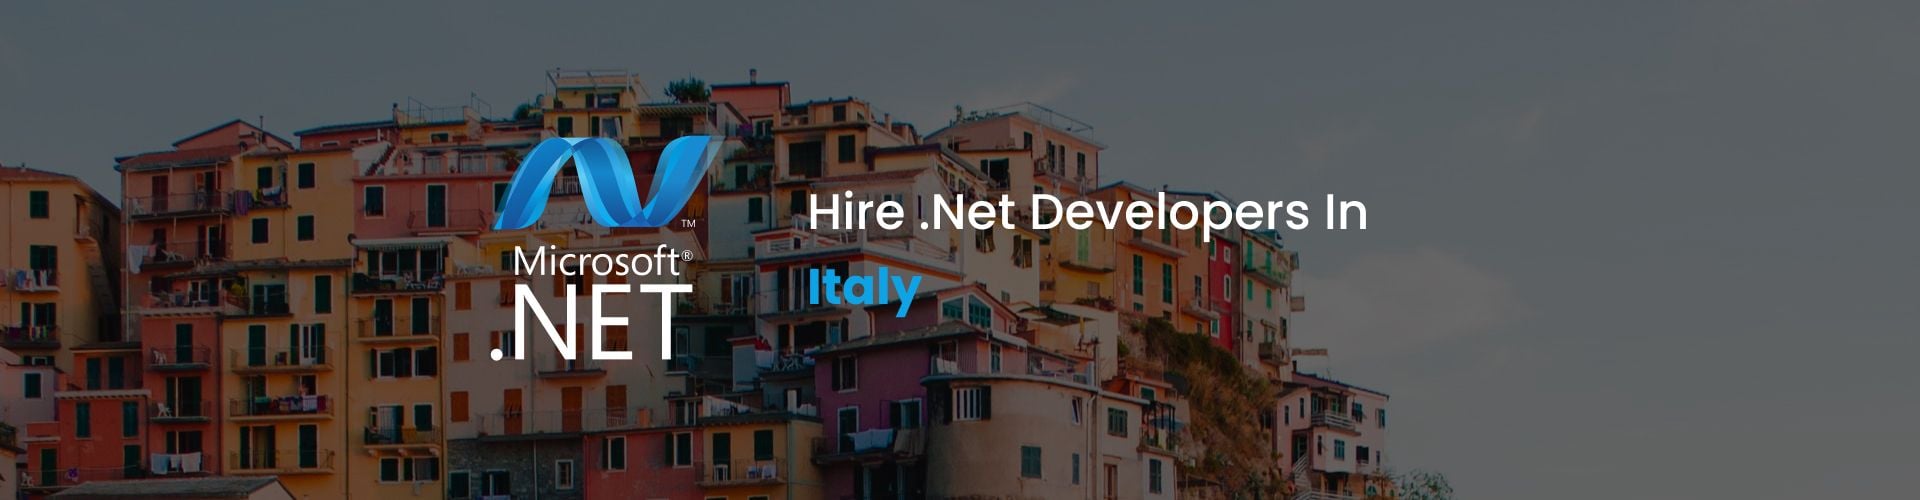 hire .net developers in italy